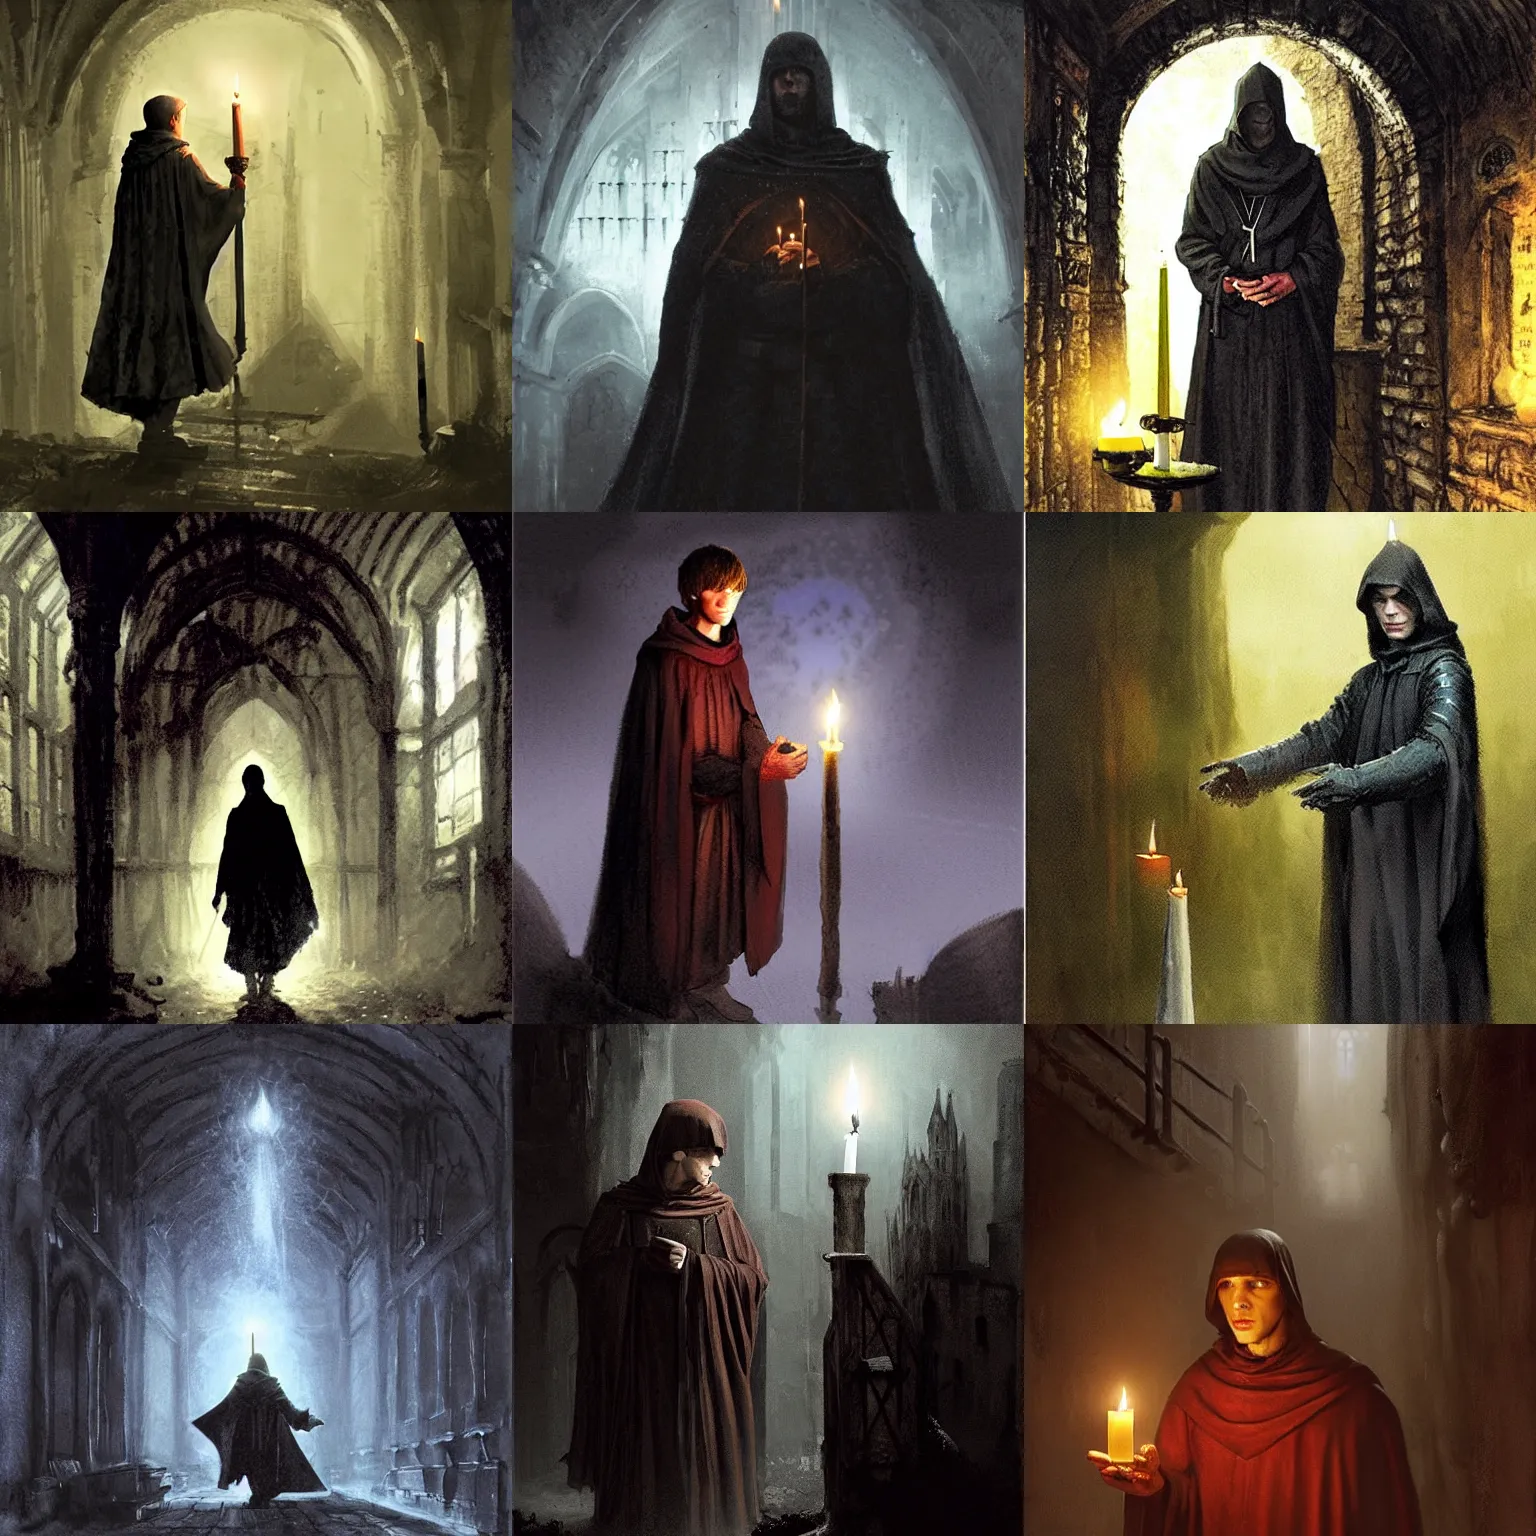 Prompt: jesse eisenberg as an enigmatic medieval christian ( ( monk ) ) in a dark underground city. dark shadows, colorful, candle light, law contrasts, ( ( dim light ) ) ) fantasy concept art by jakub rozalski, jan matejko, and j. dickenson